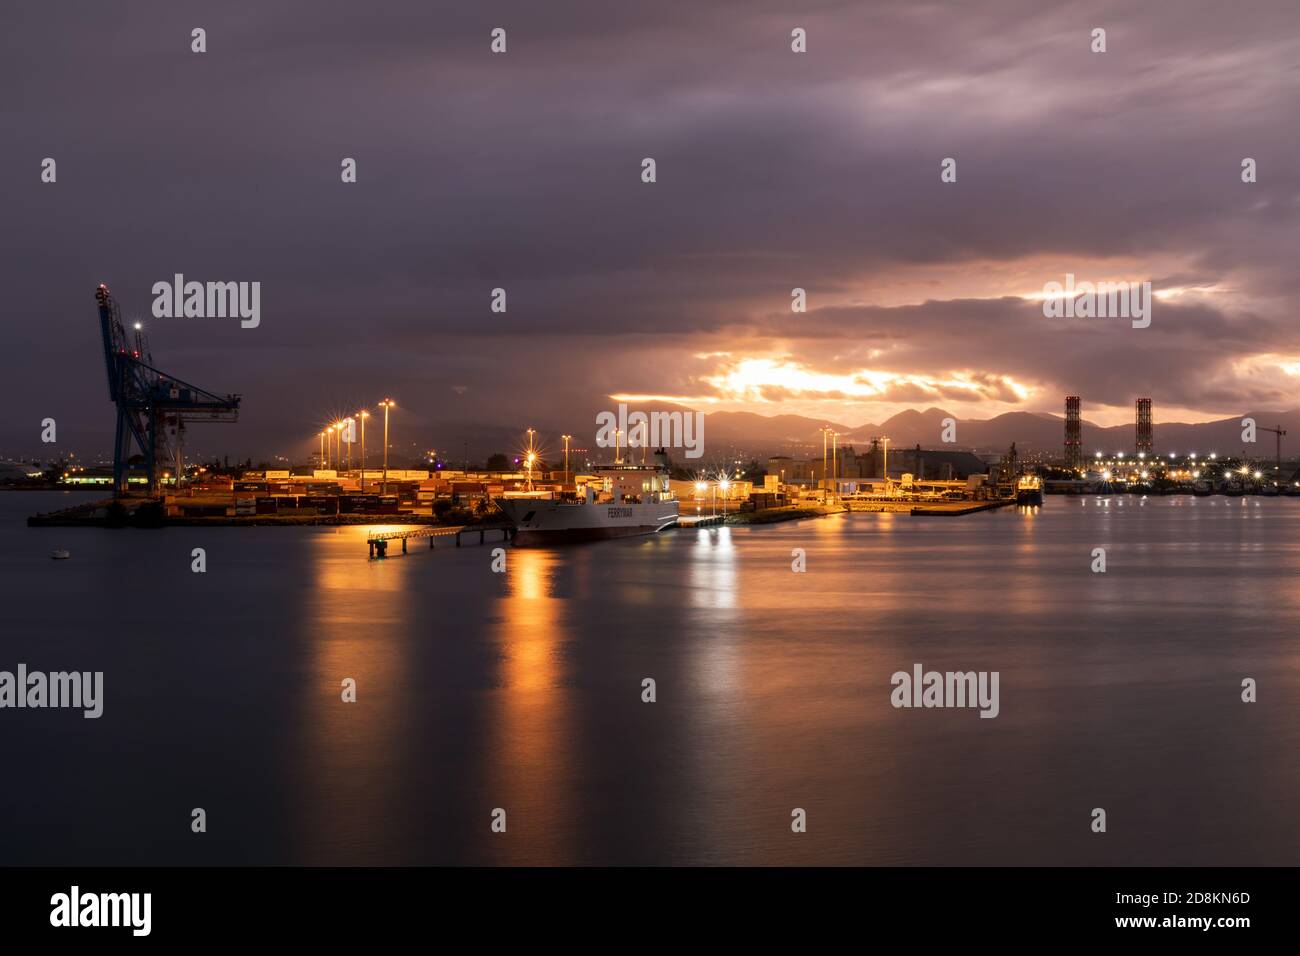 5 JAN 2020 - Pointe-a-Pitre, Guadeloupe, FWI - Jarry industrial zone and harbor by night Stock Photo